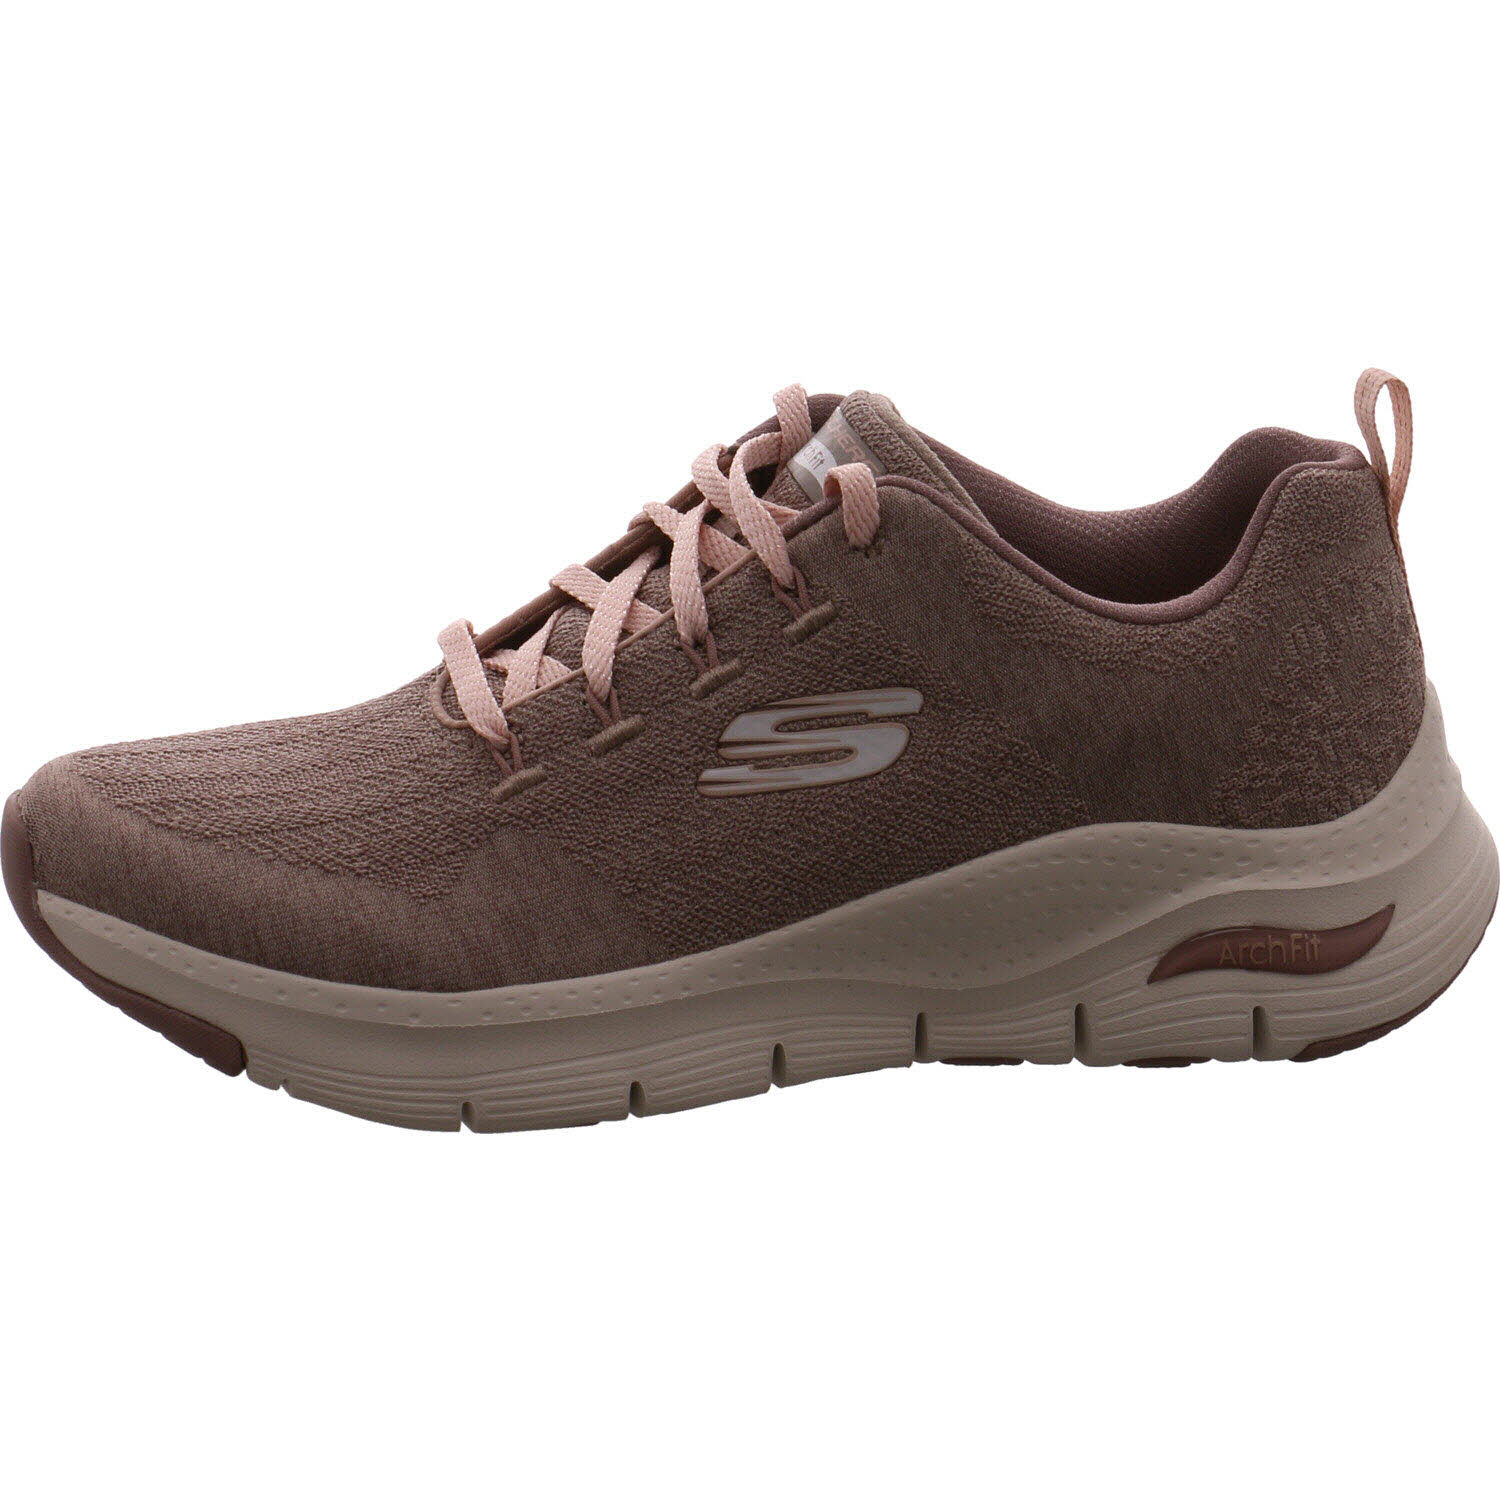 Skechers Sneaker low Arch Fit Comfy Wave